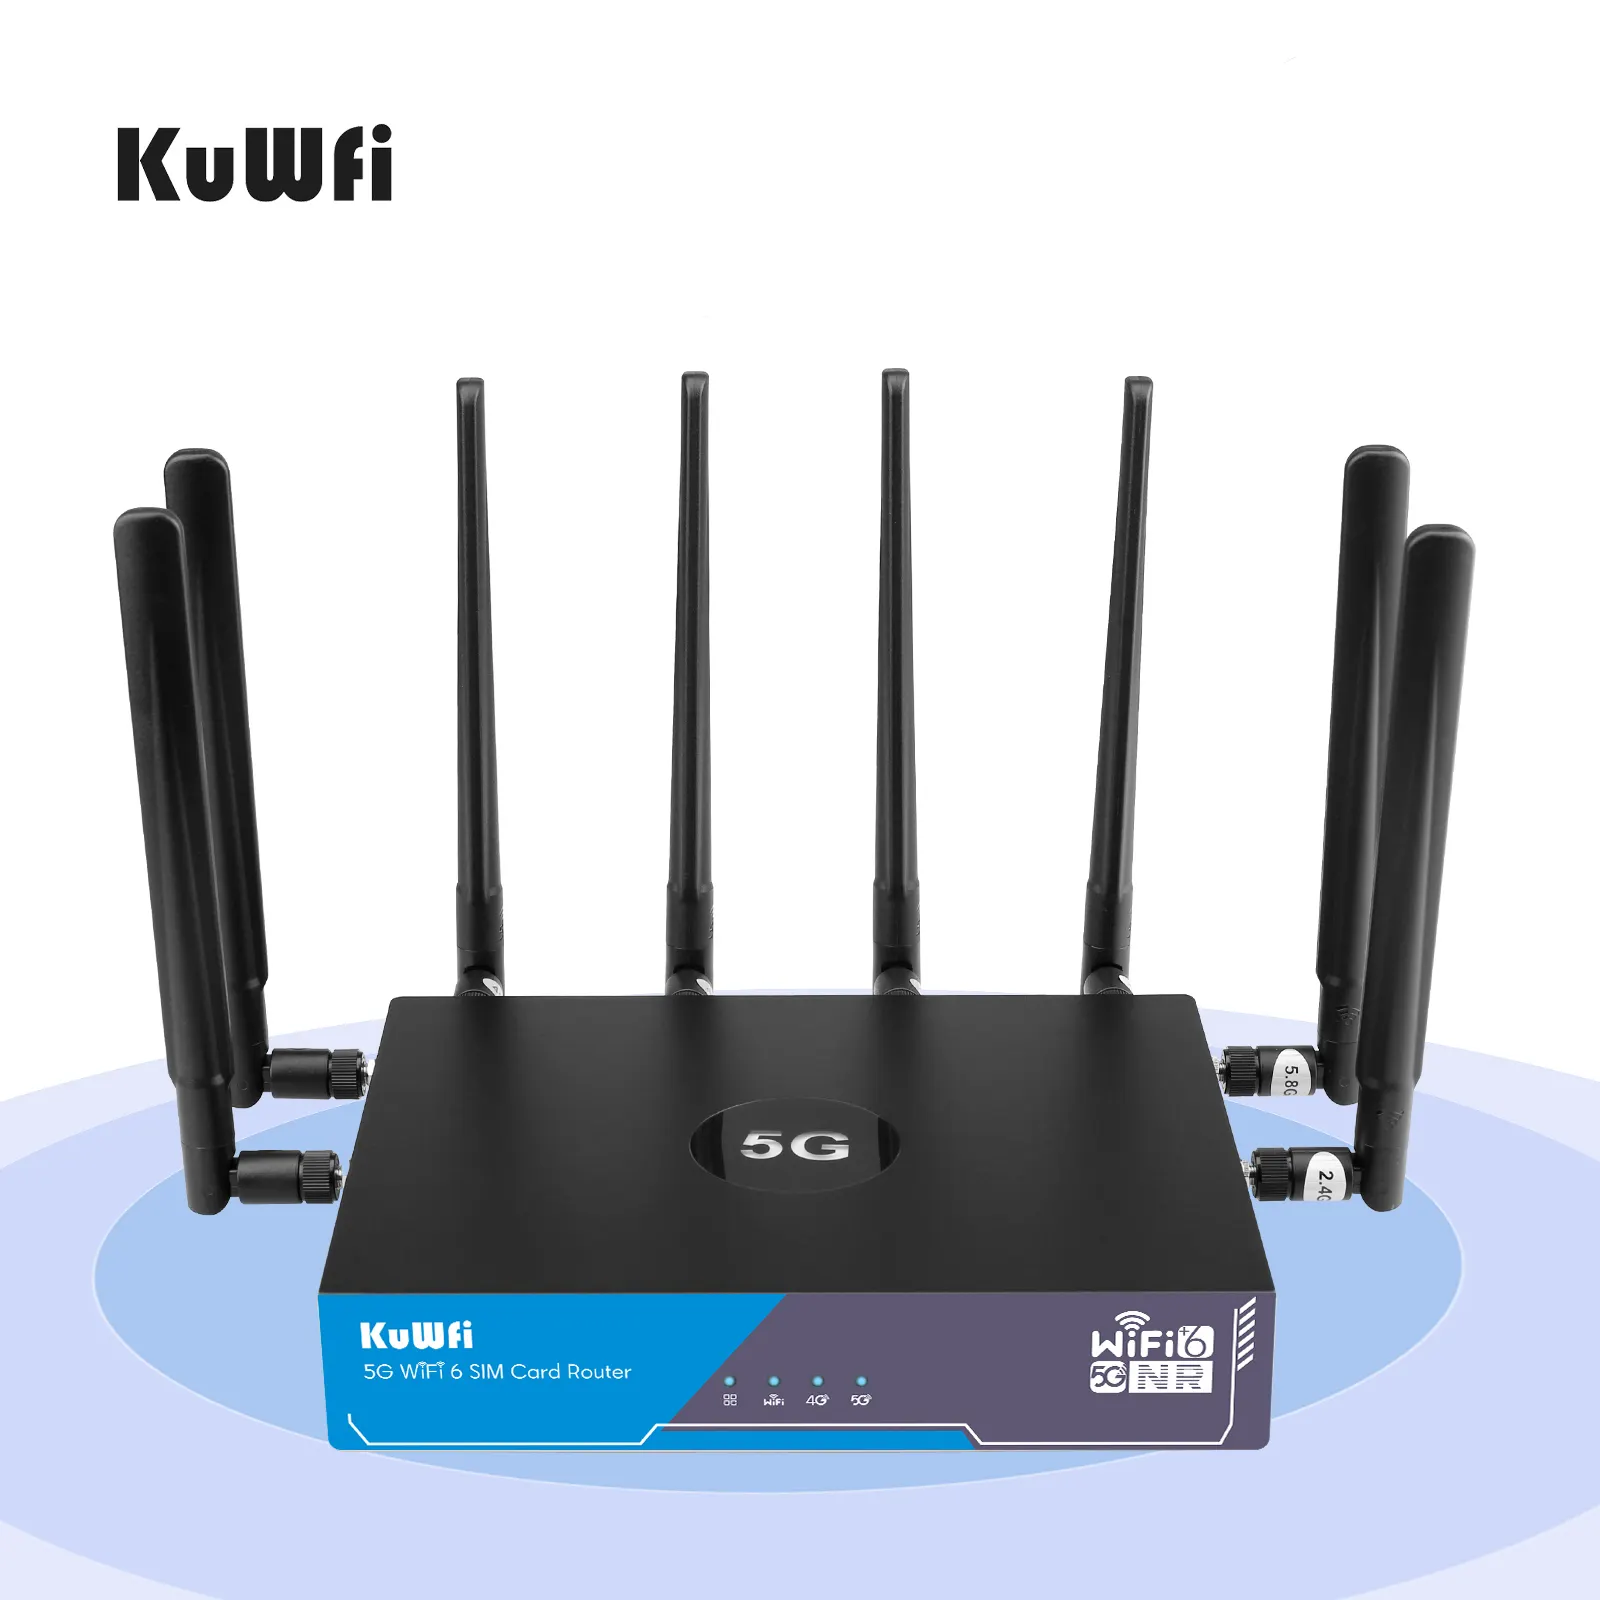 KuWFi RM503Q 5G Router Modem WIFI6 3000 Mbps With Sim Card Slot Outdoor 5G Router CPE